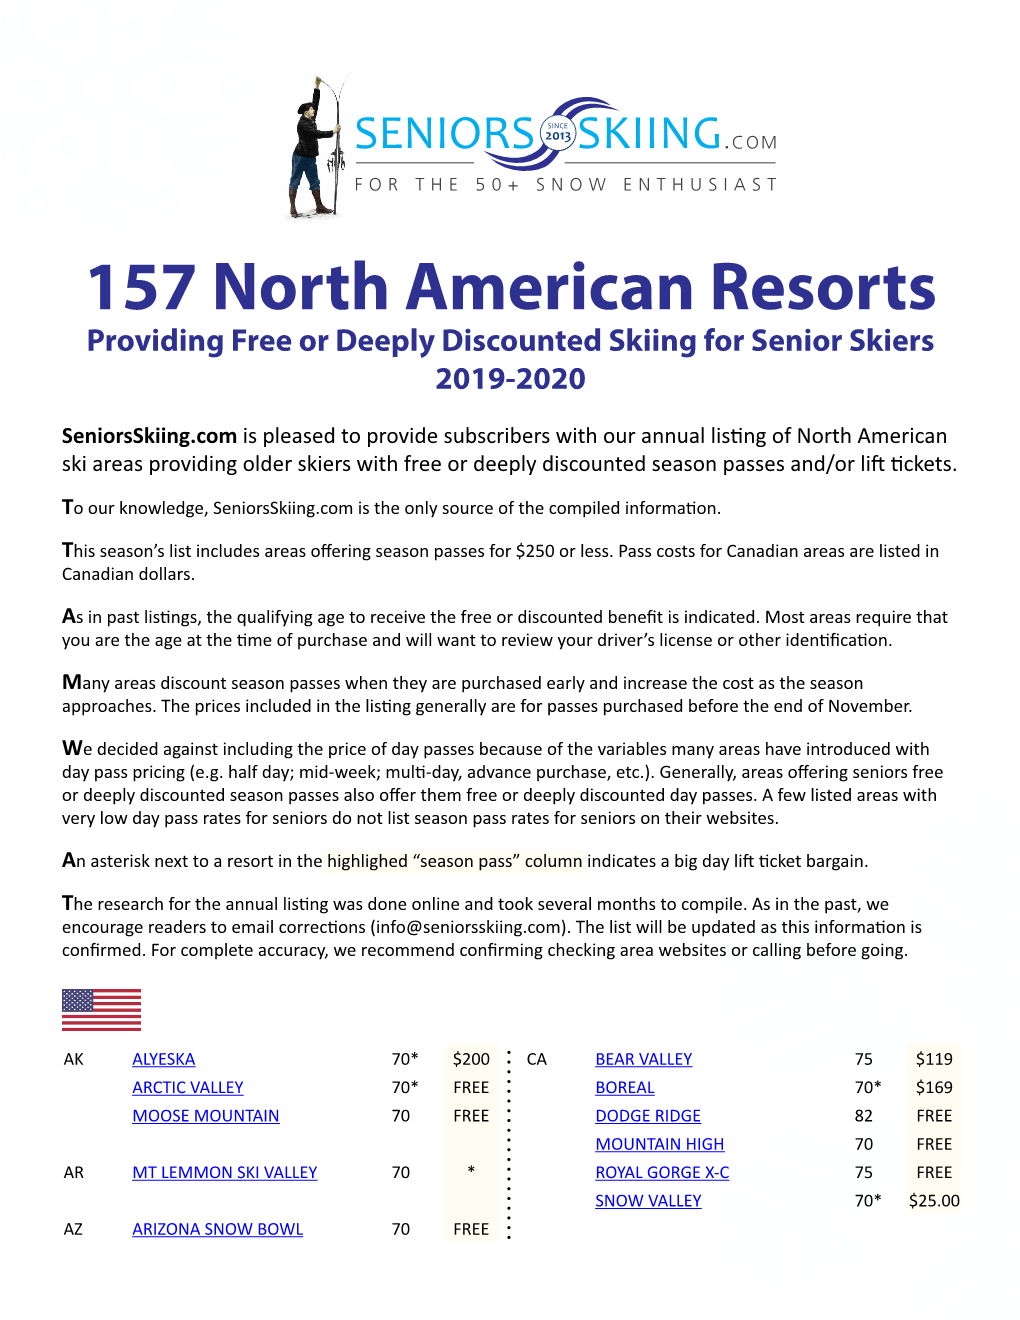 157 North American Resorts Providing Free Or Deeply Discounted Skiing for Senior Skiers 2019-2020